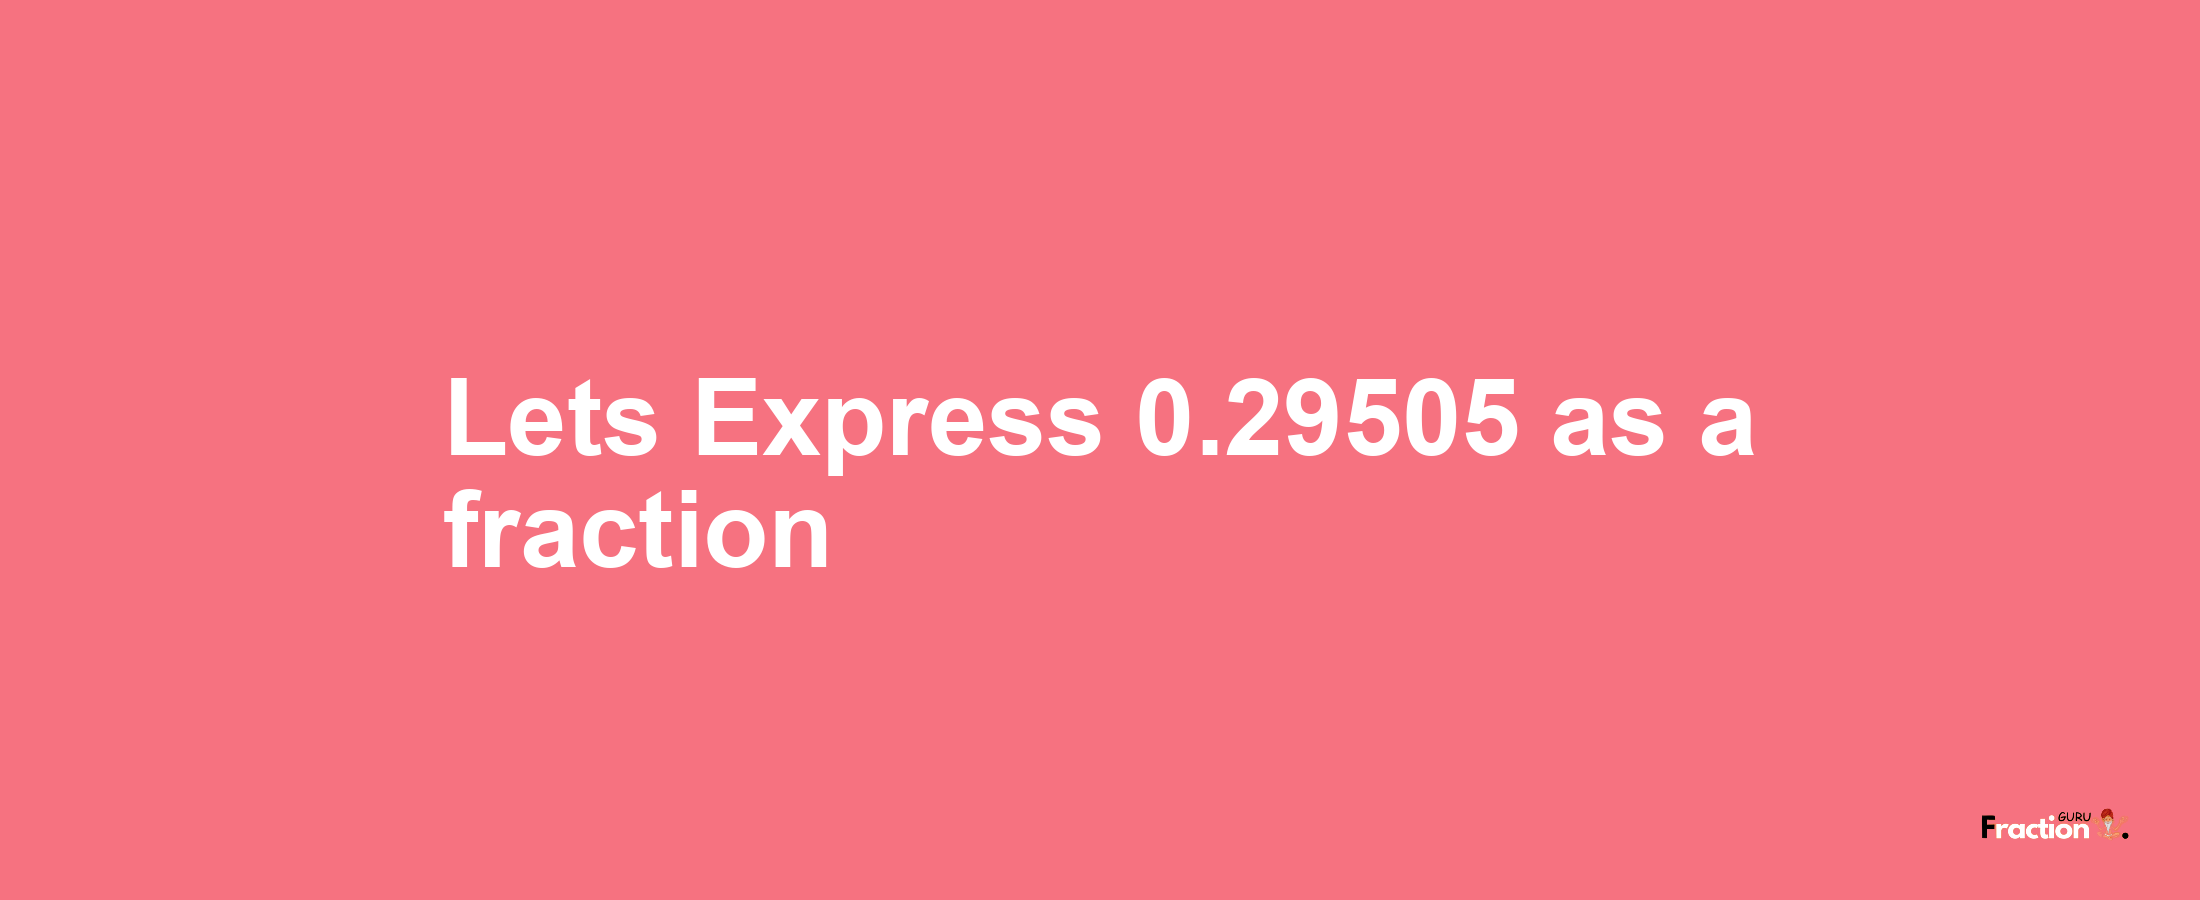 Lets Express 0.29505 as afraction